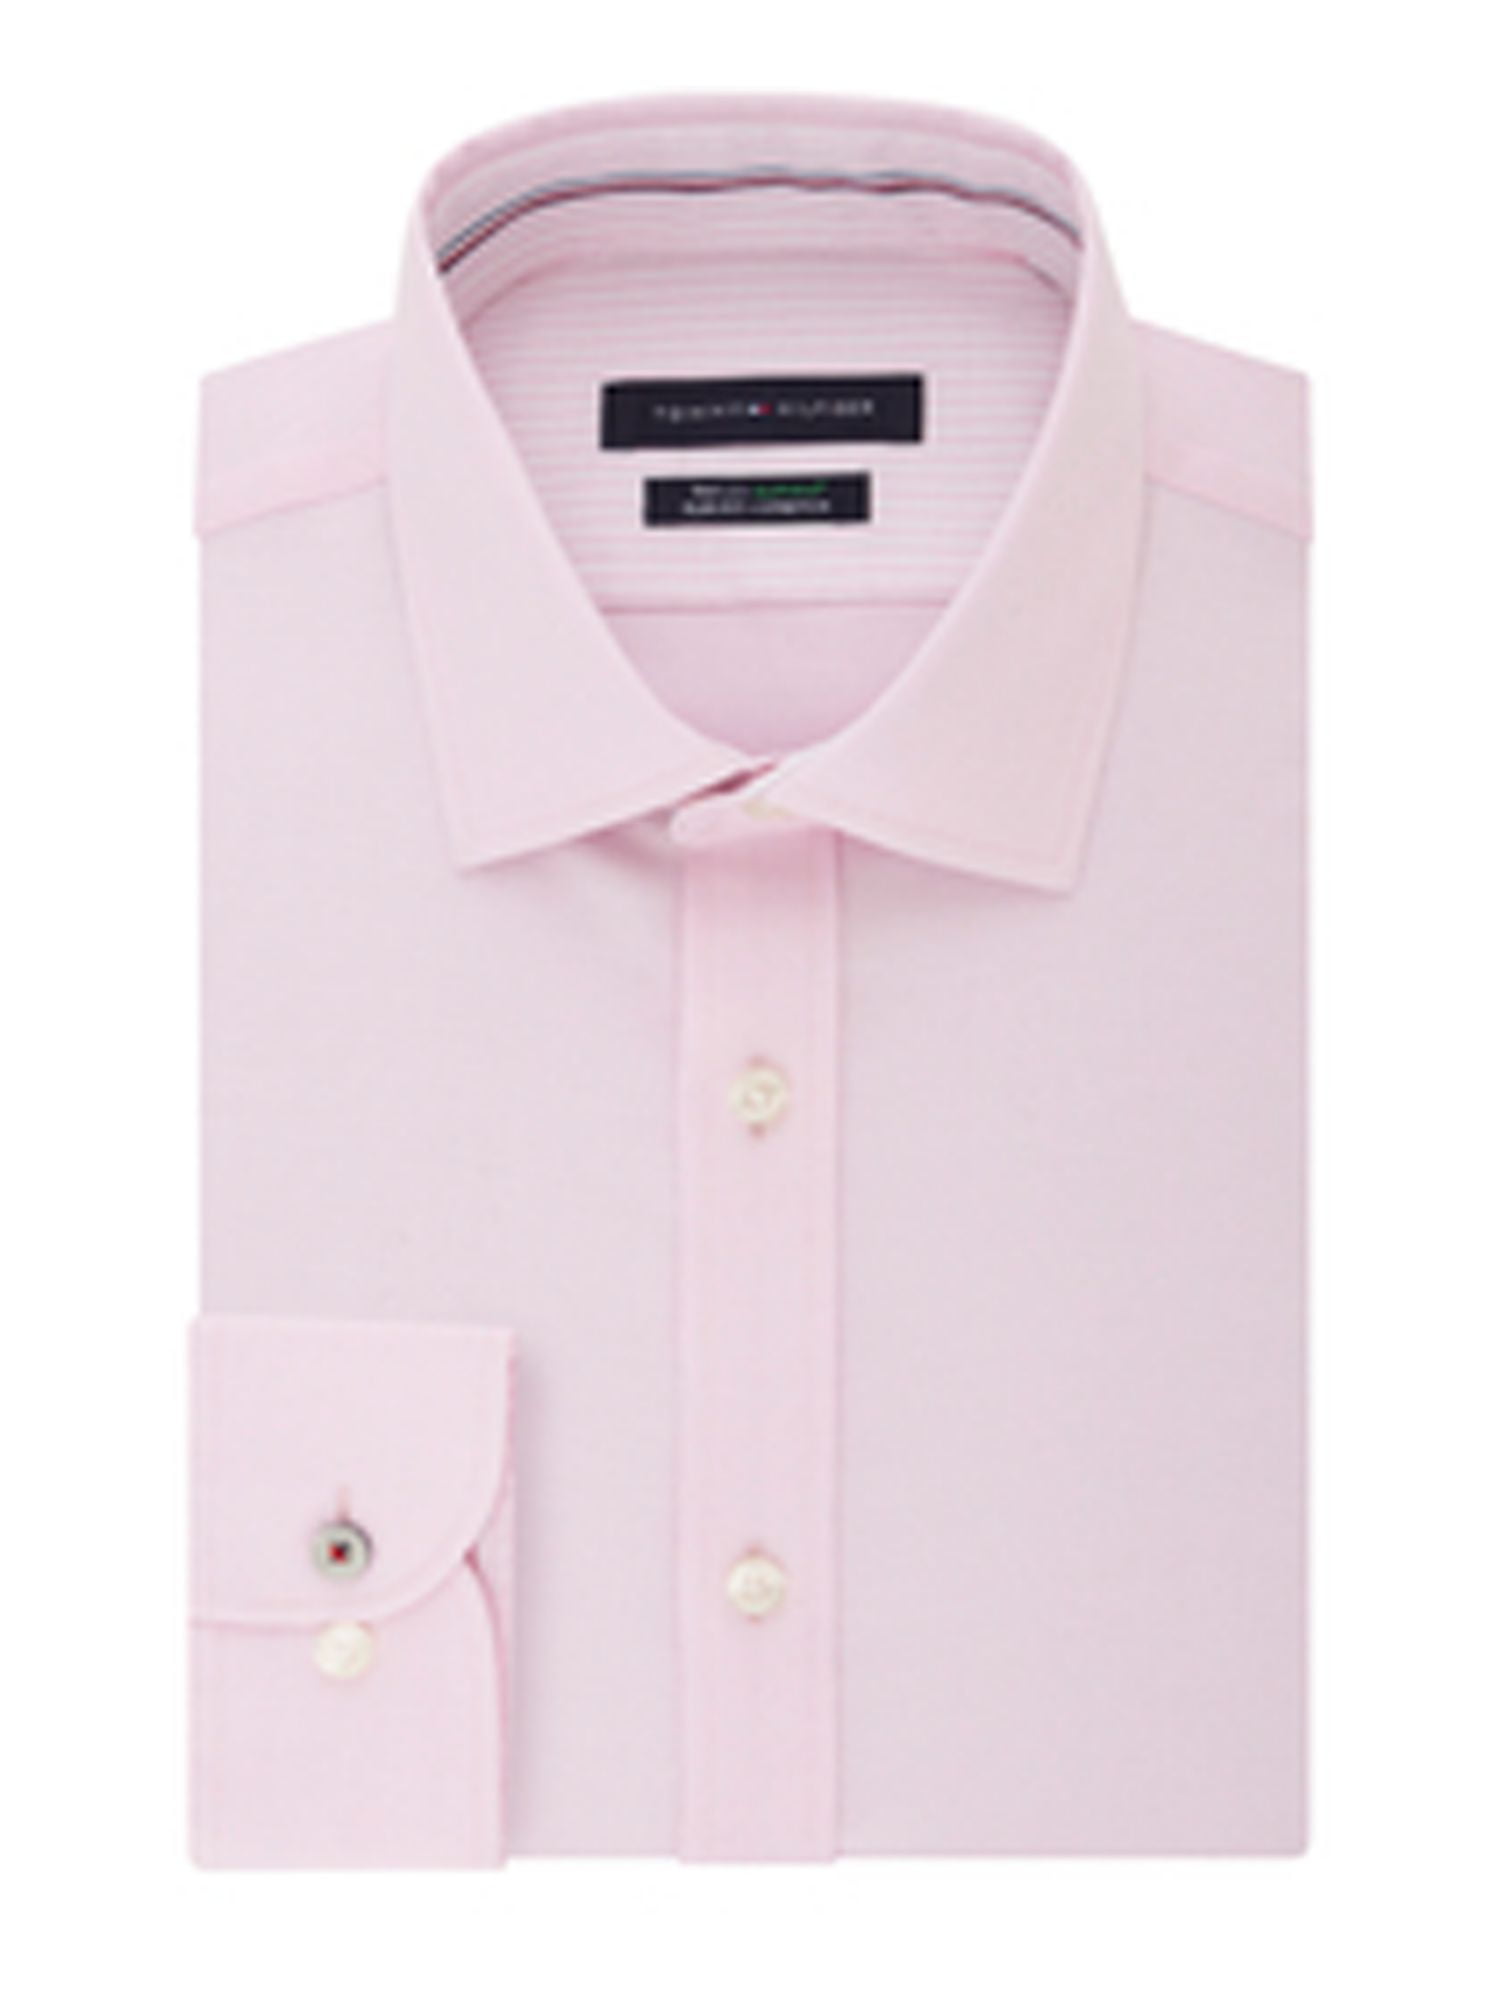 TOMMY HILFIGER Mens Pink Collared Classic Fit Dress Shirt 17.5 35\36 ...